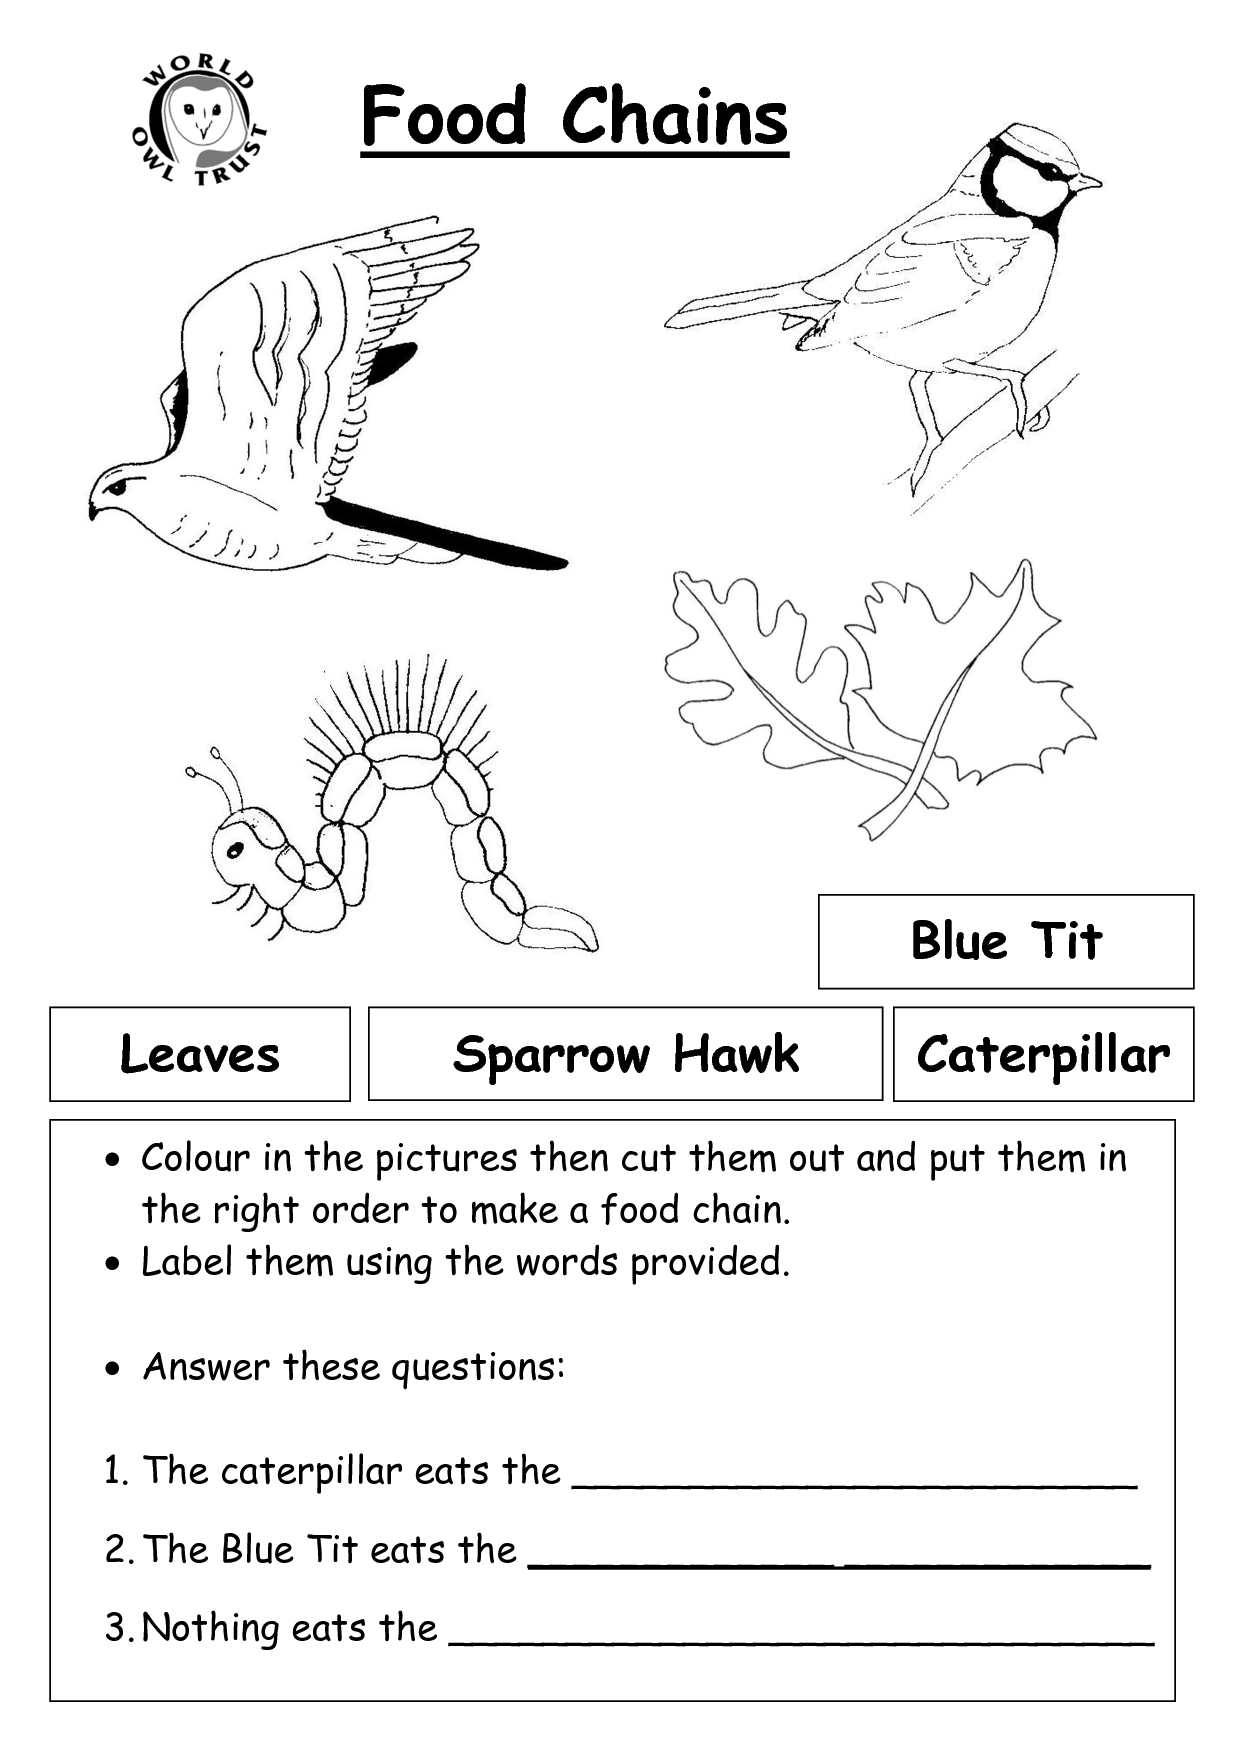 Food Chain Worksheet Answers